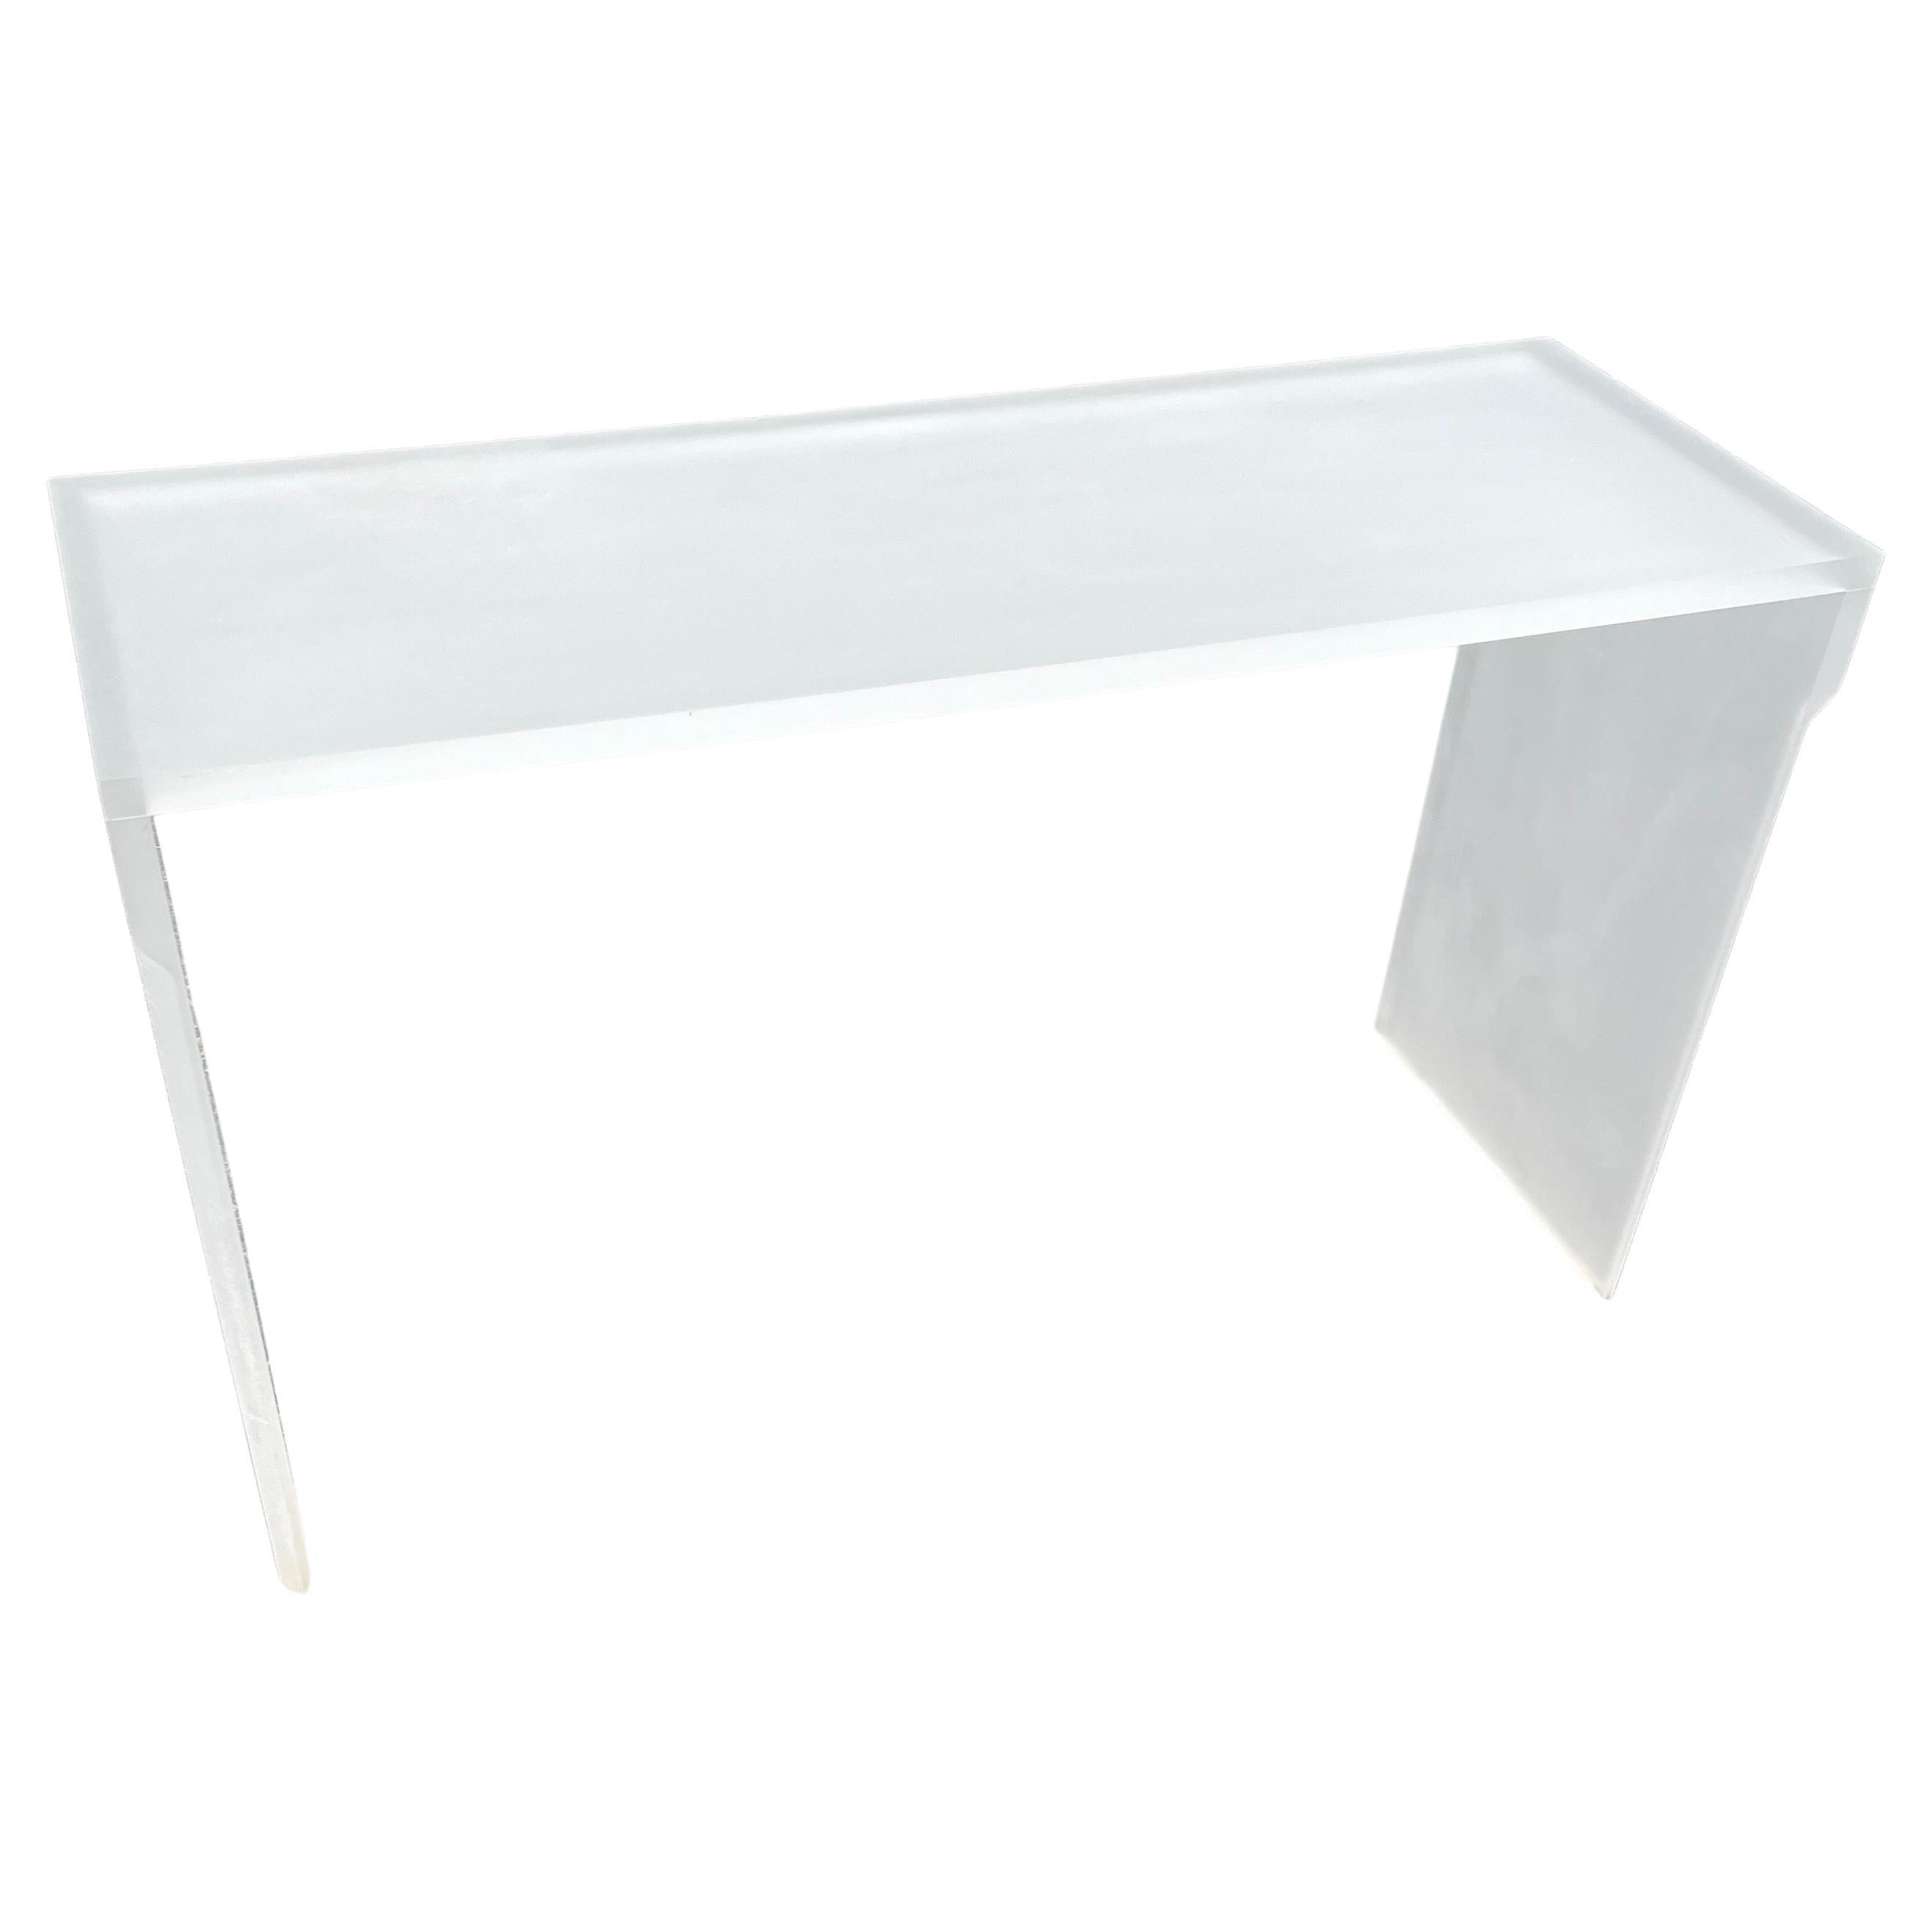 Italian Mid-Century Modern Frosted Lucite Console, 1970's In Good Condition For Sale In Haddonfield, NJ